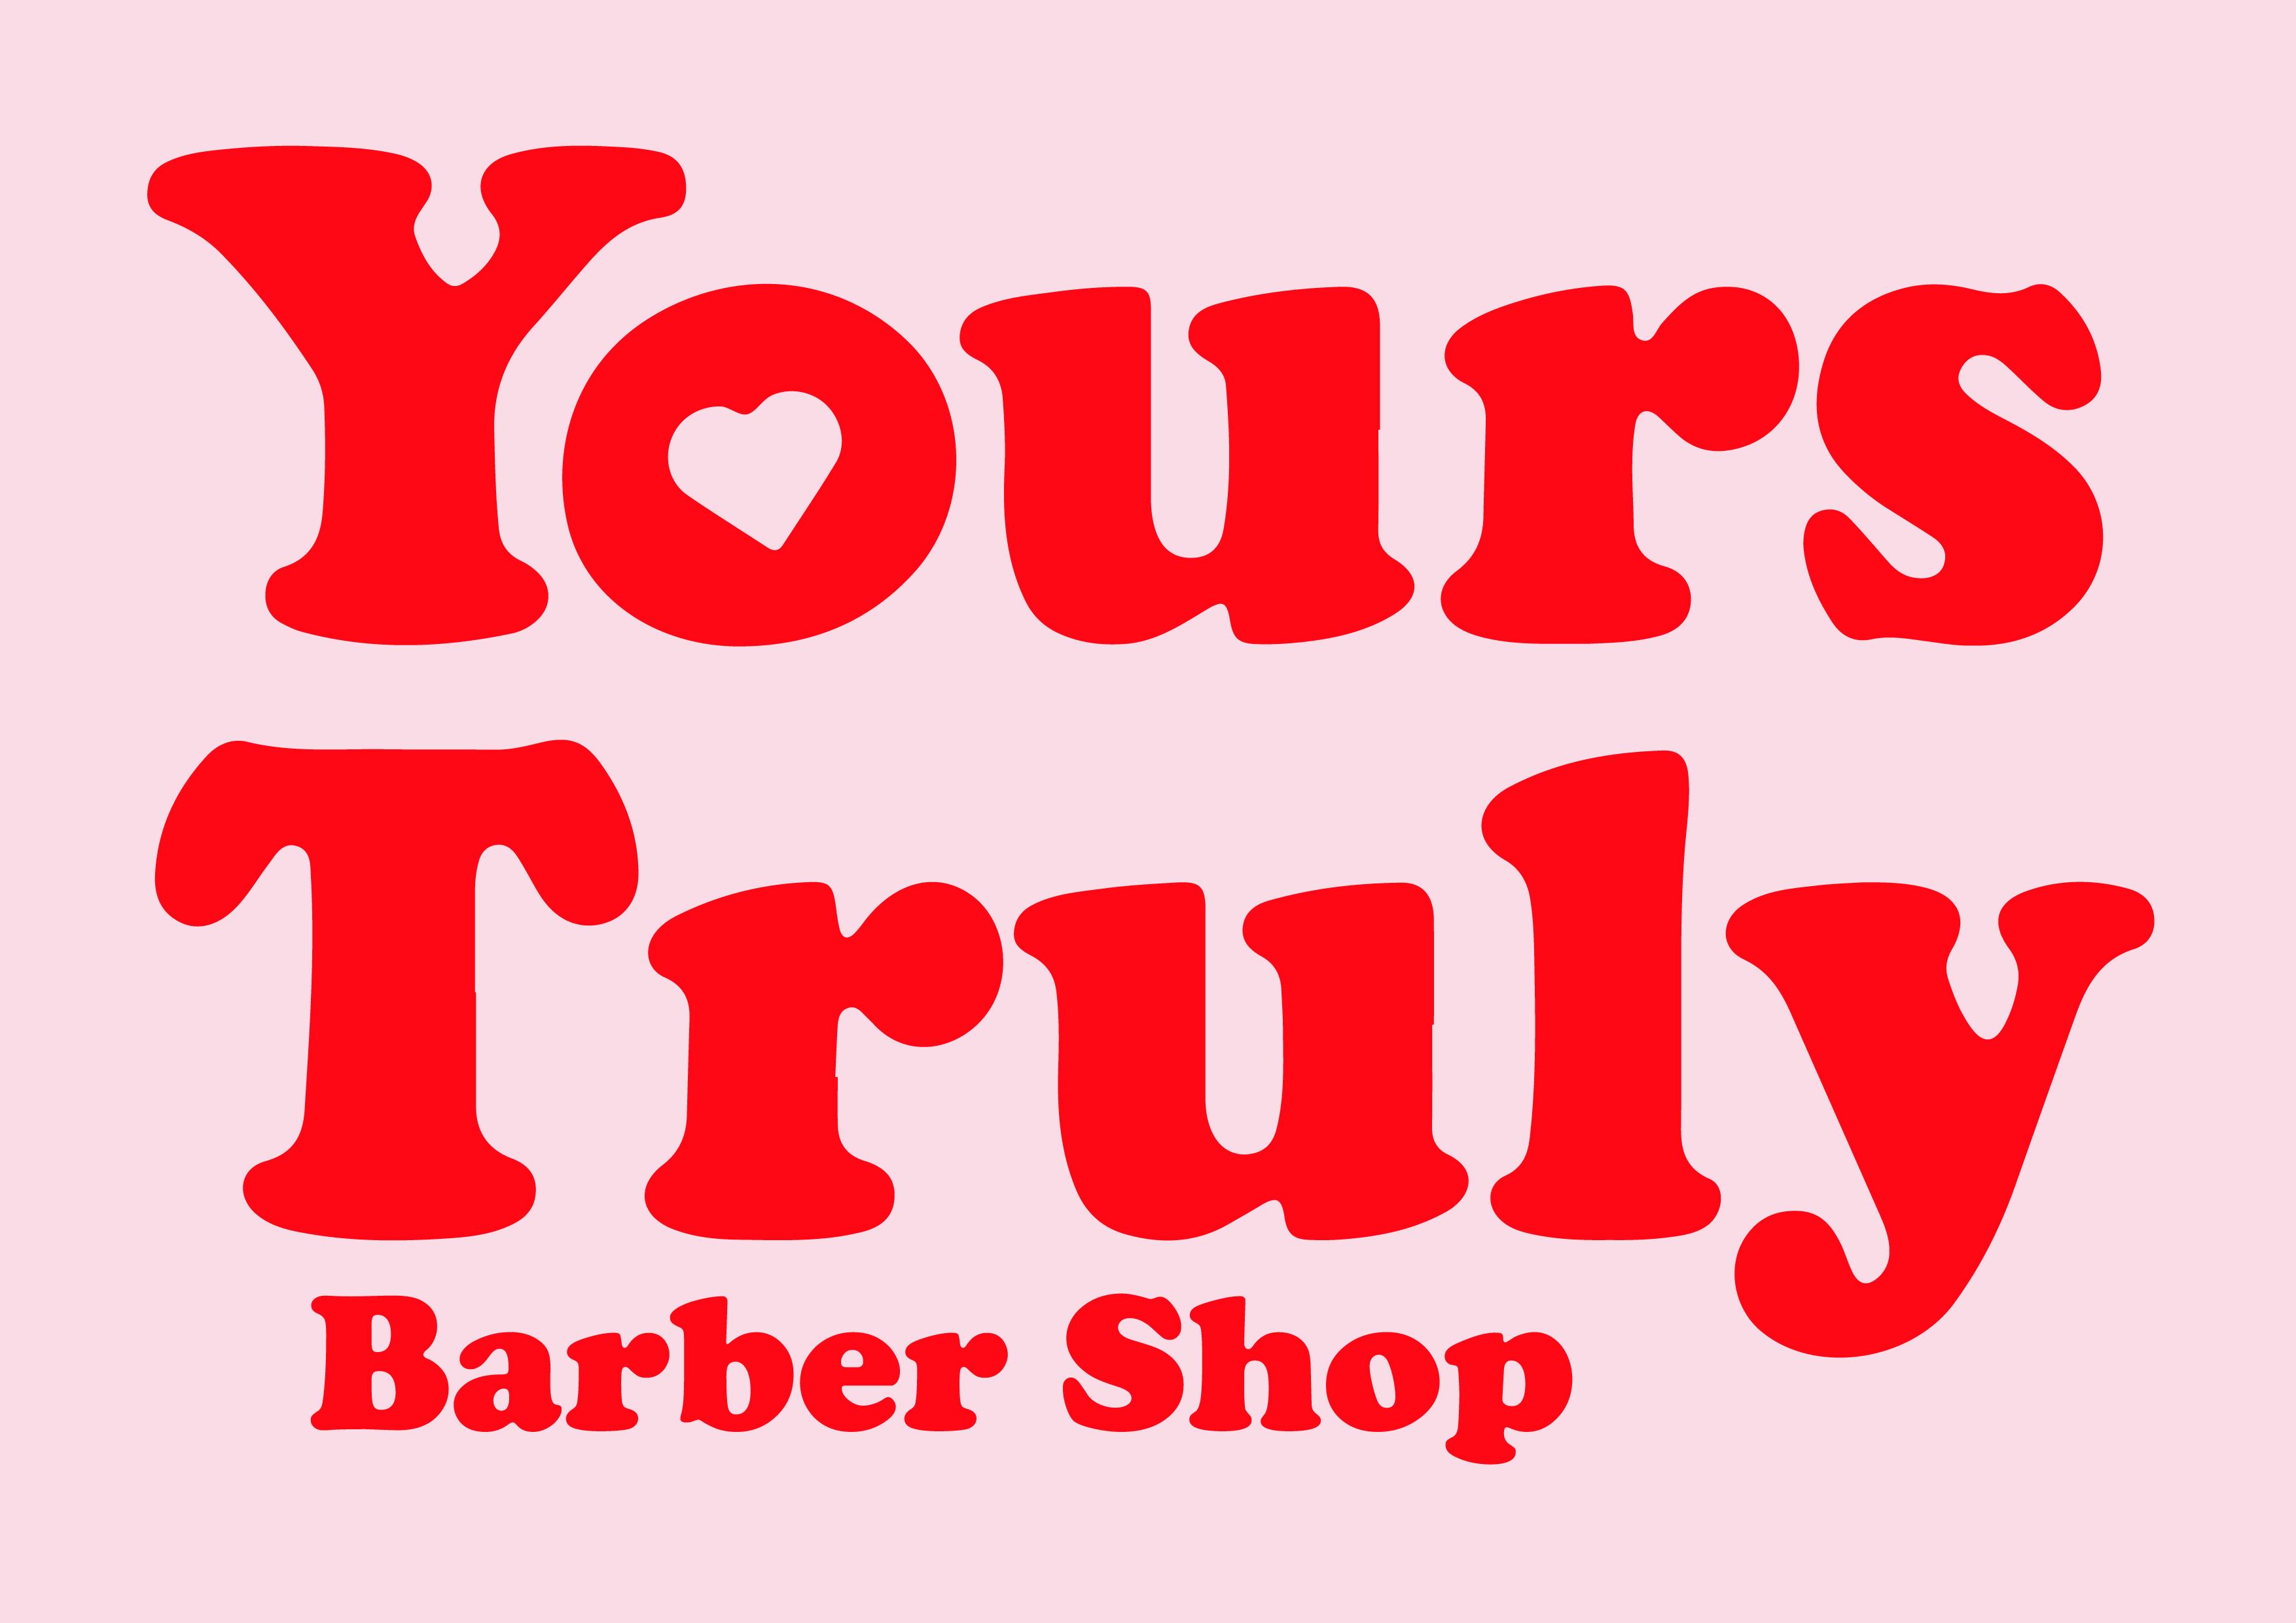 Yours Truly Barbers